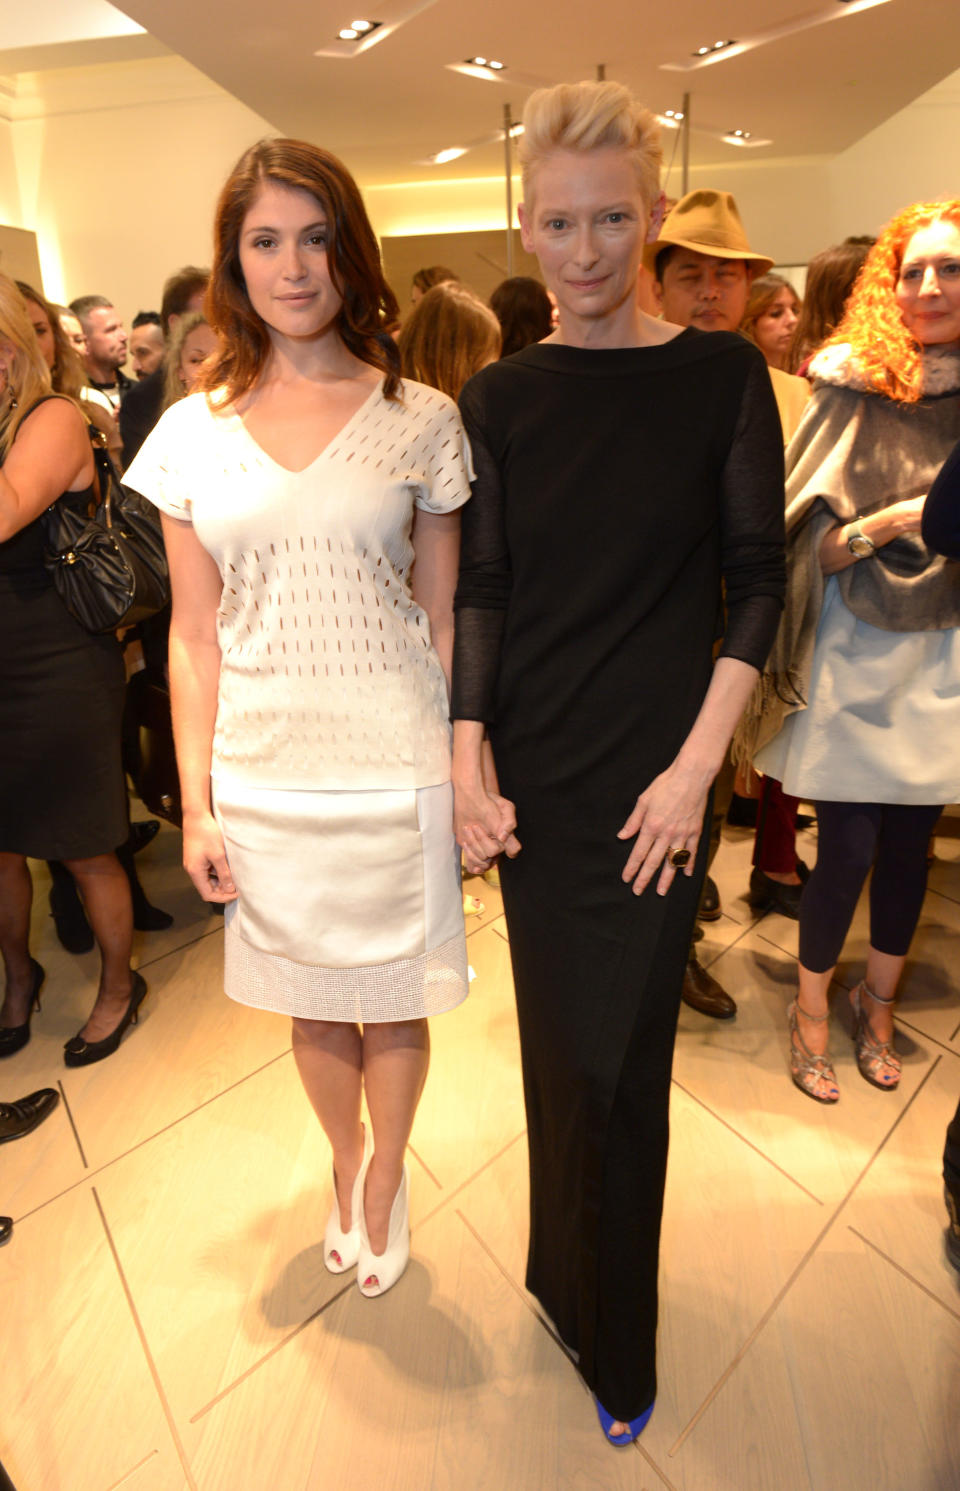 Gemma Arterton, left, and Tilda Swinton pose for photographers at the Pringle of Scotland Store Launch Party during London Fashion Week in London on Monday, Sept. 16, 2013. (Photo by Jon Furniss/Invision/AP)